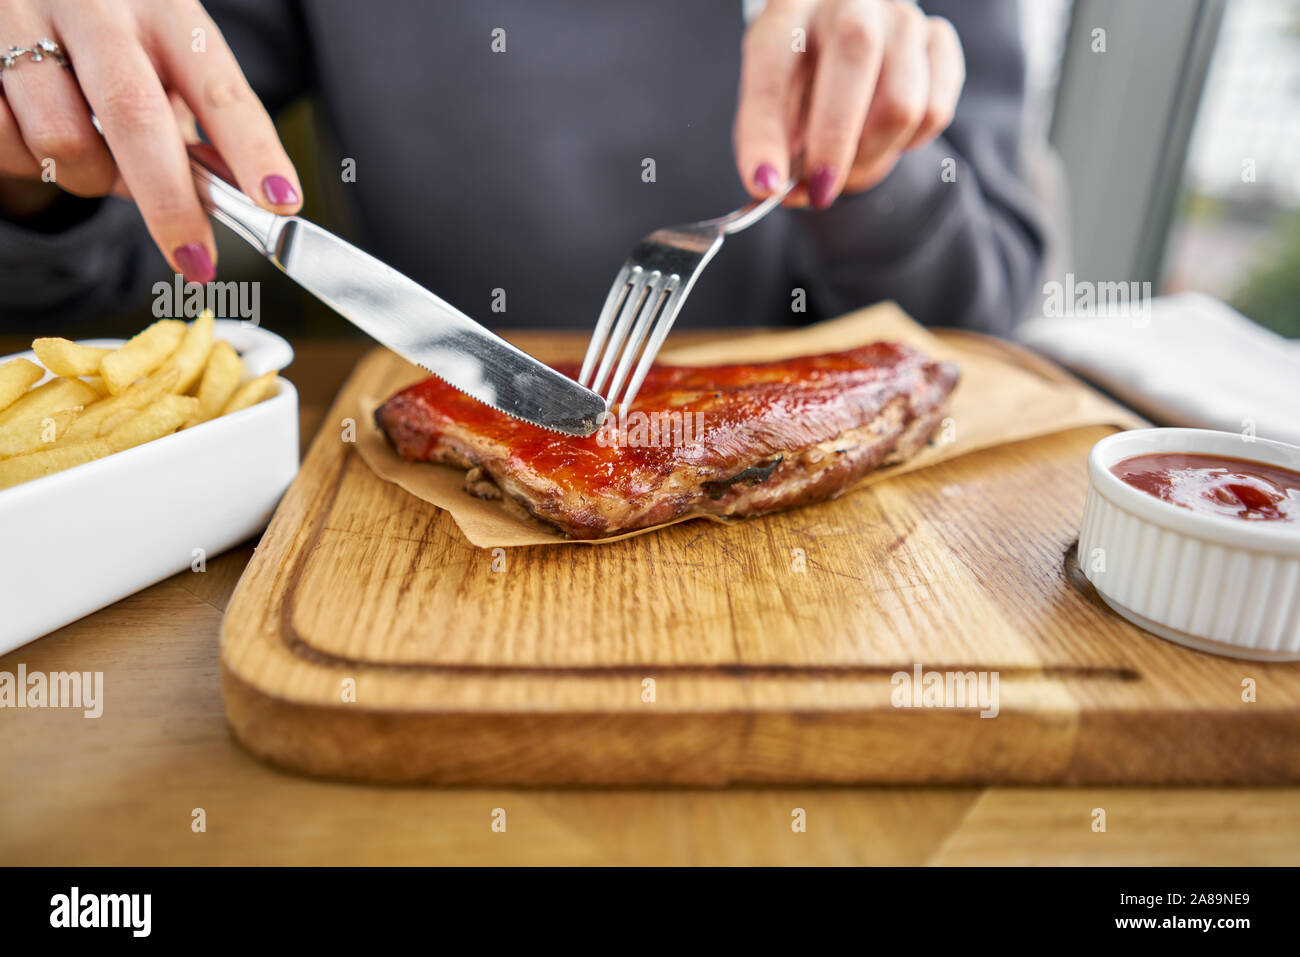 Lunch in a restaurant, a woman cuts Delicious Pork ribs. Full rack of ribs BBQ on wooden plate with french fries and salad Stock Photo